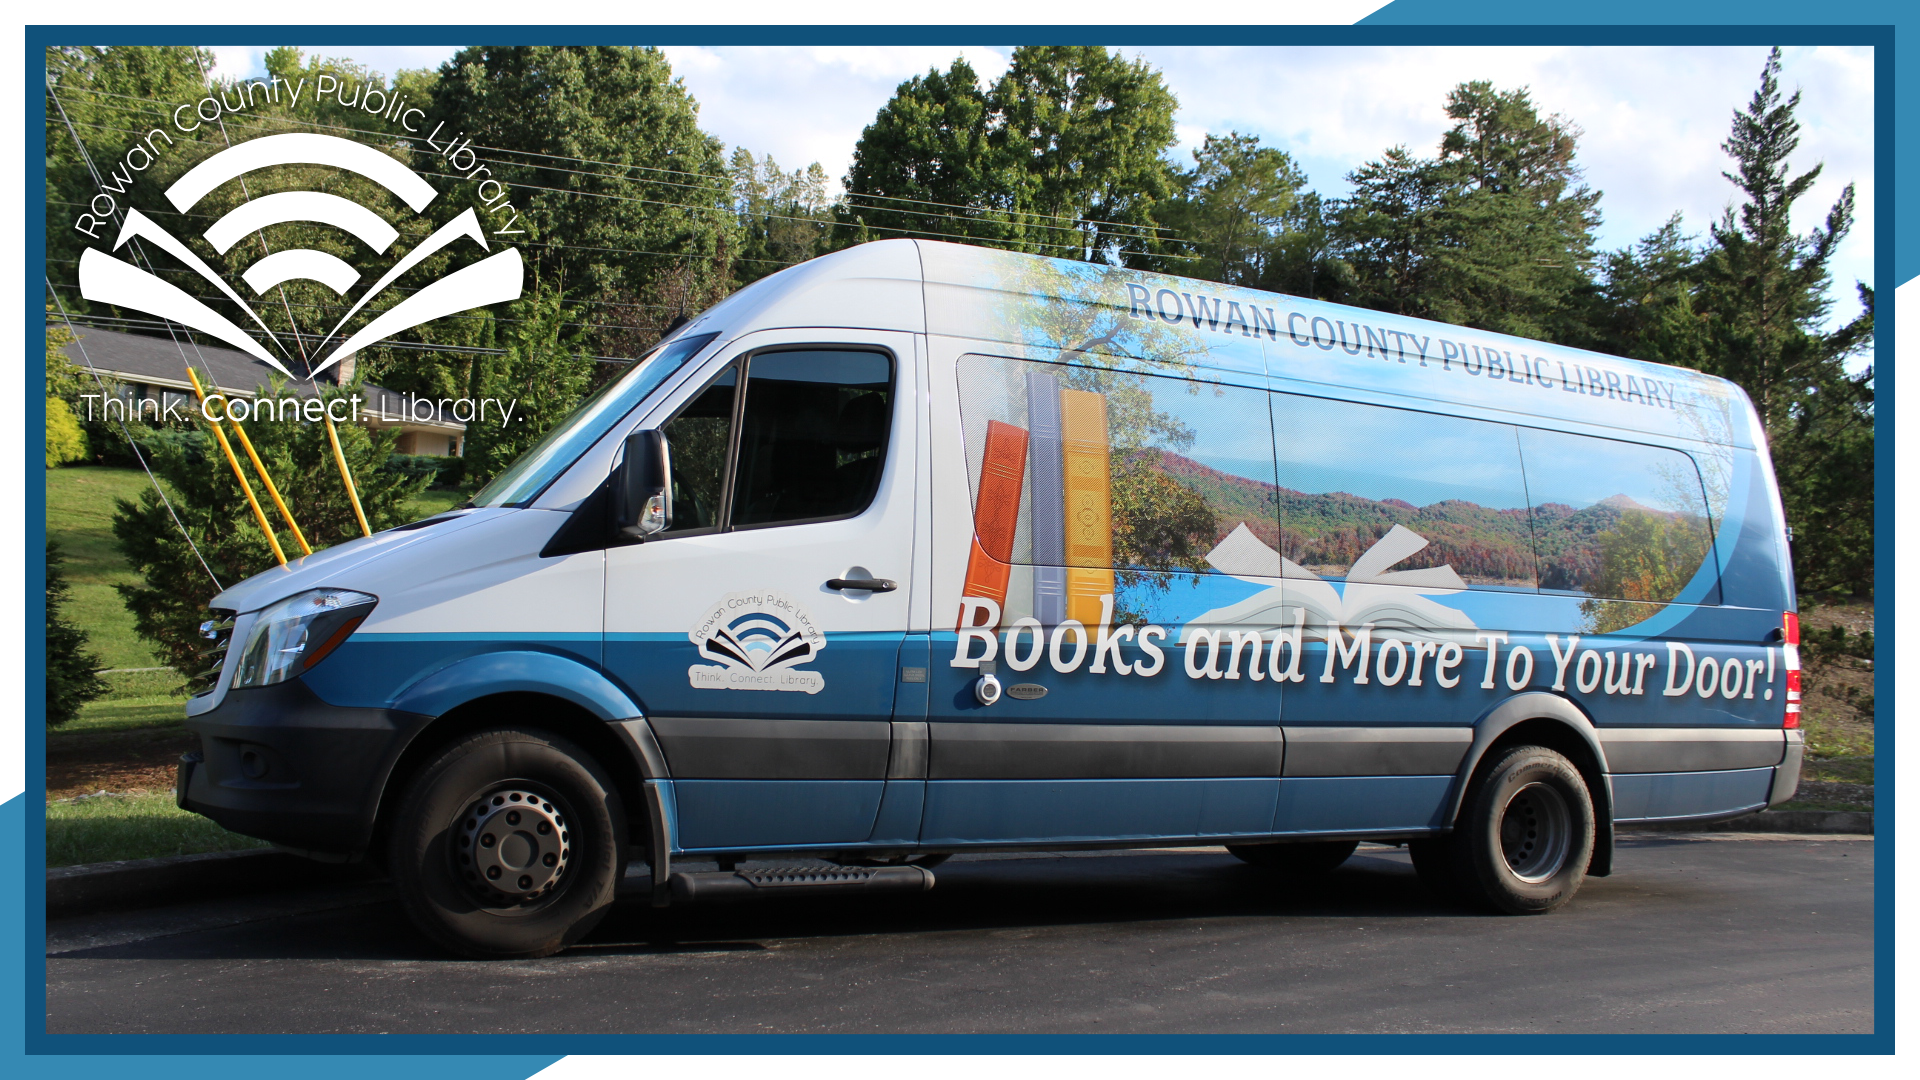 Bookmobile, schedule alternates weekly, service is free to all residents of Rowan County upon request